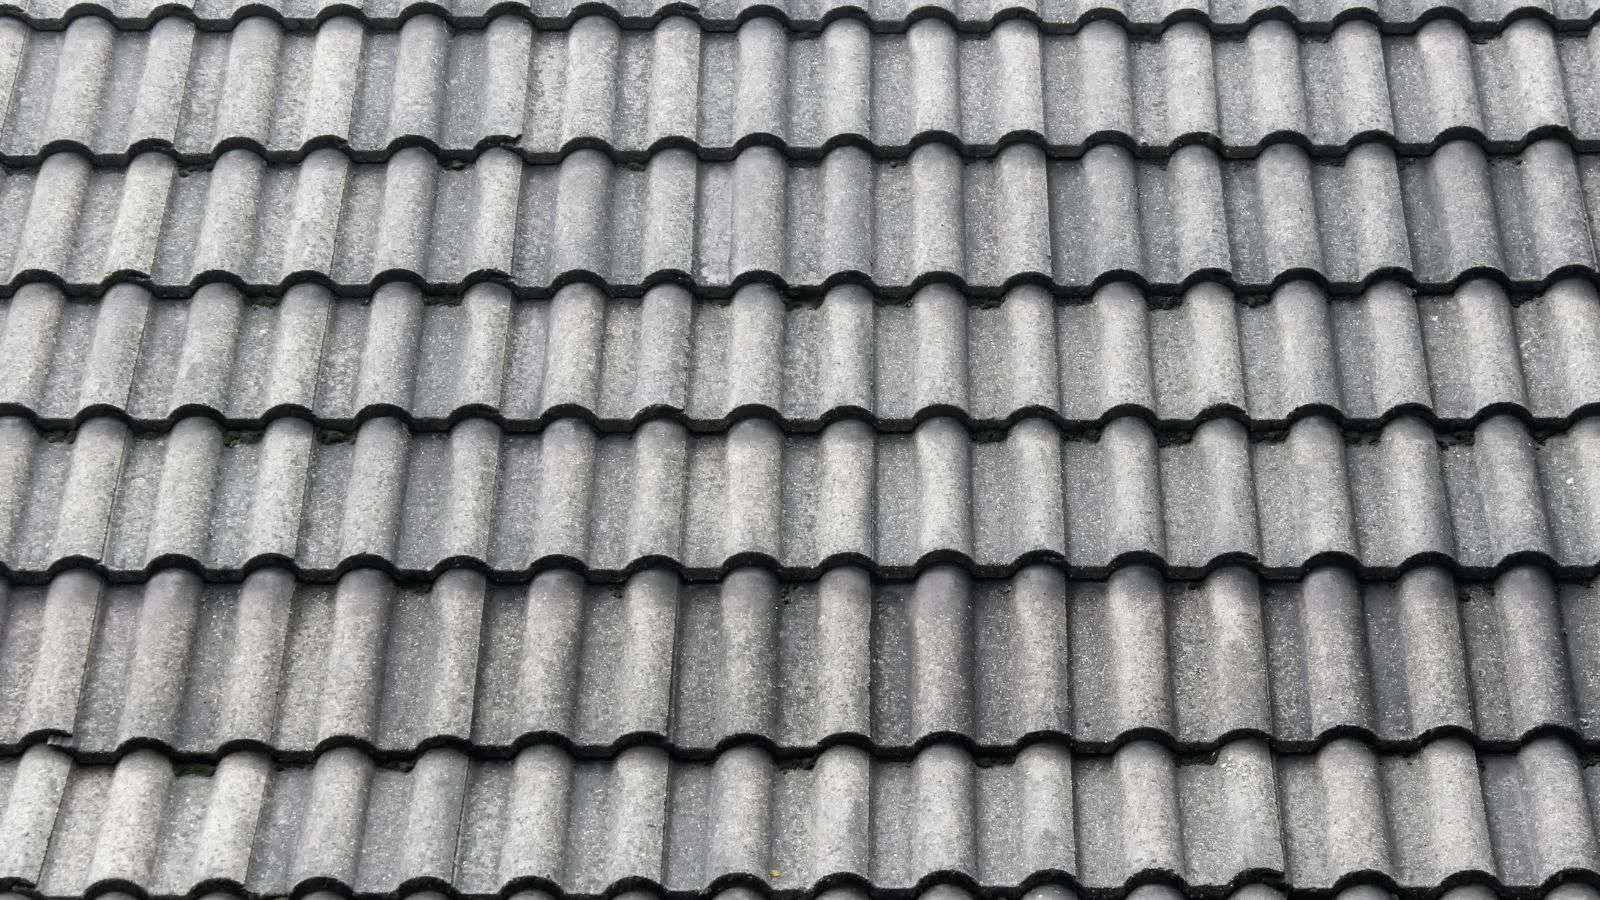 how roof slope affects concrete tile roof lifespan - bighomeprojects.com